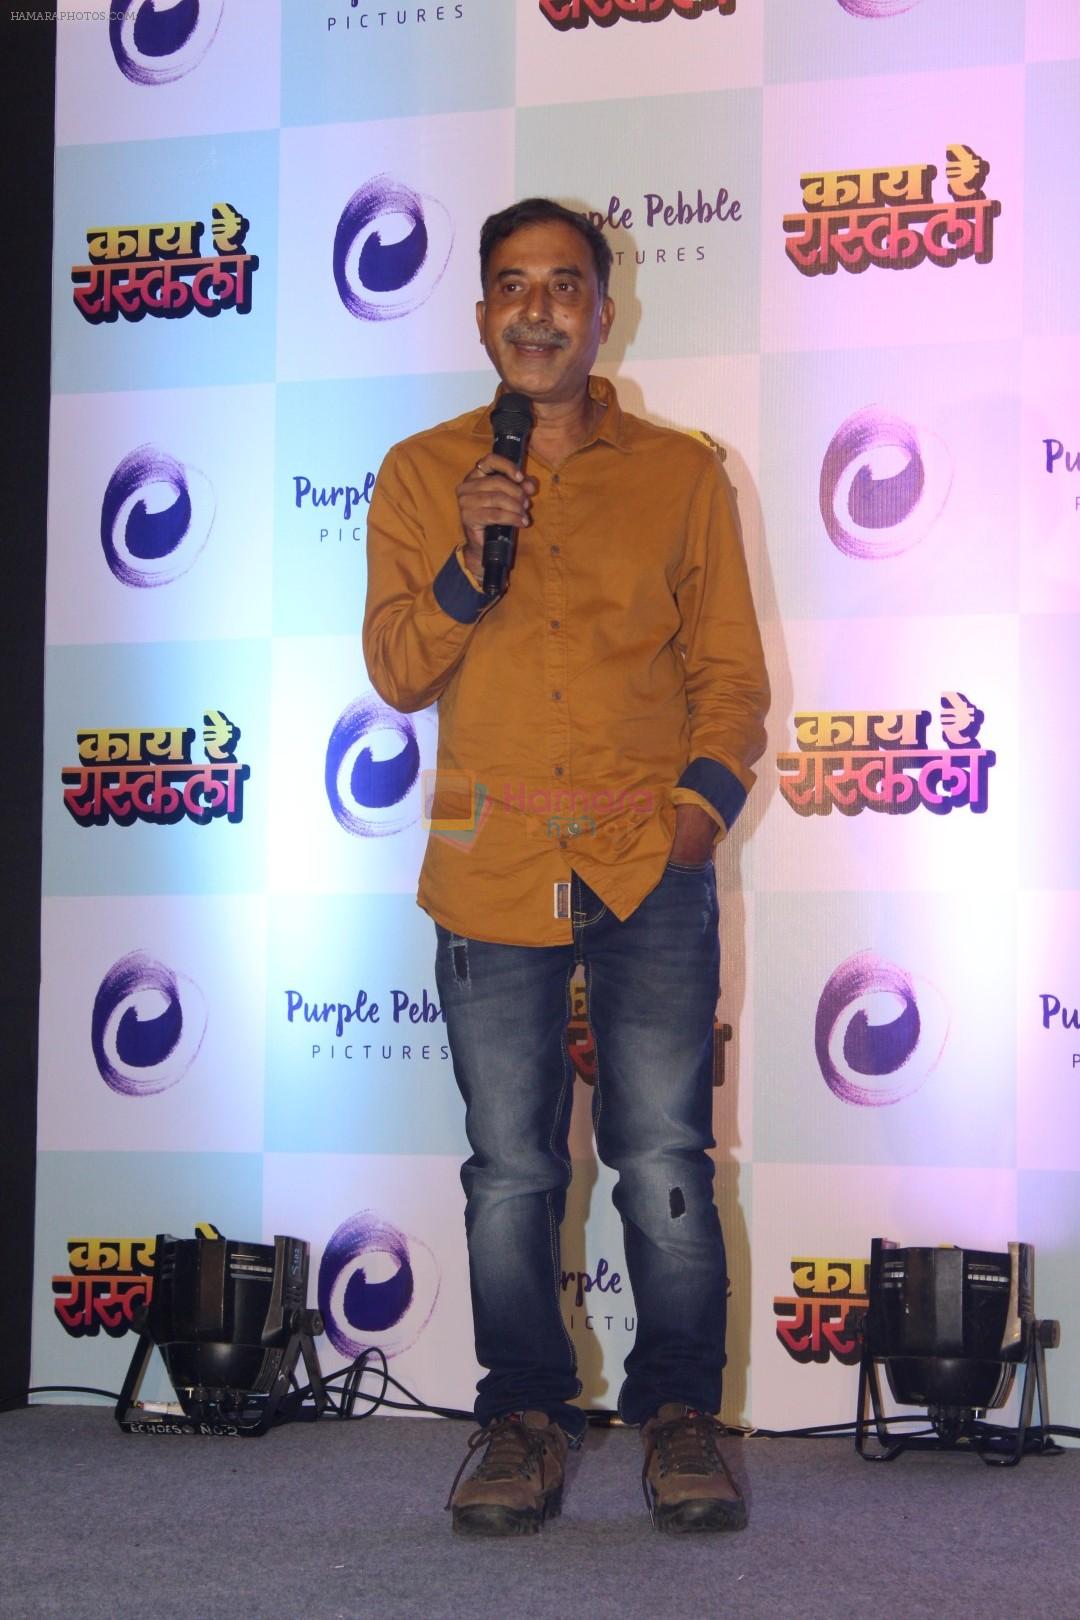 at the press conference of Marathi Film Kay Re Rascala on 14th July 2017